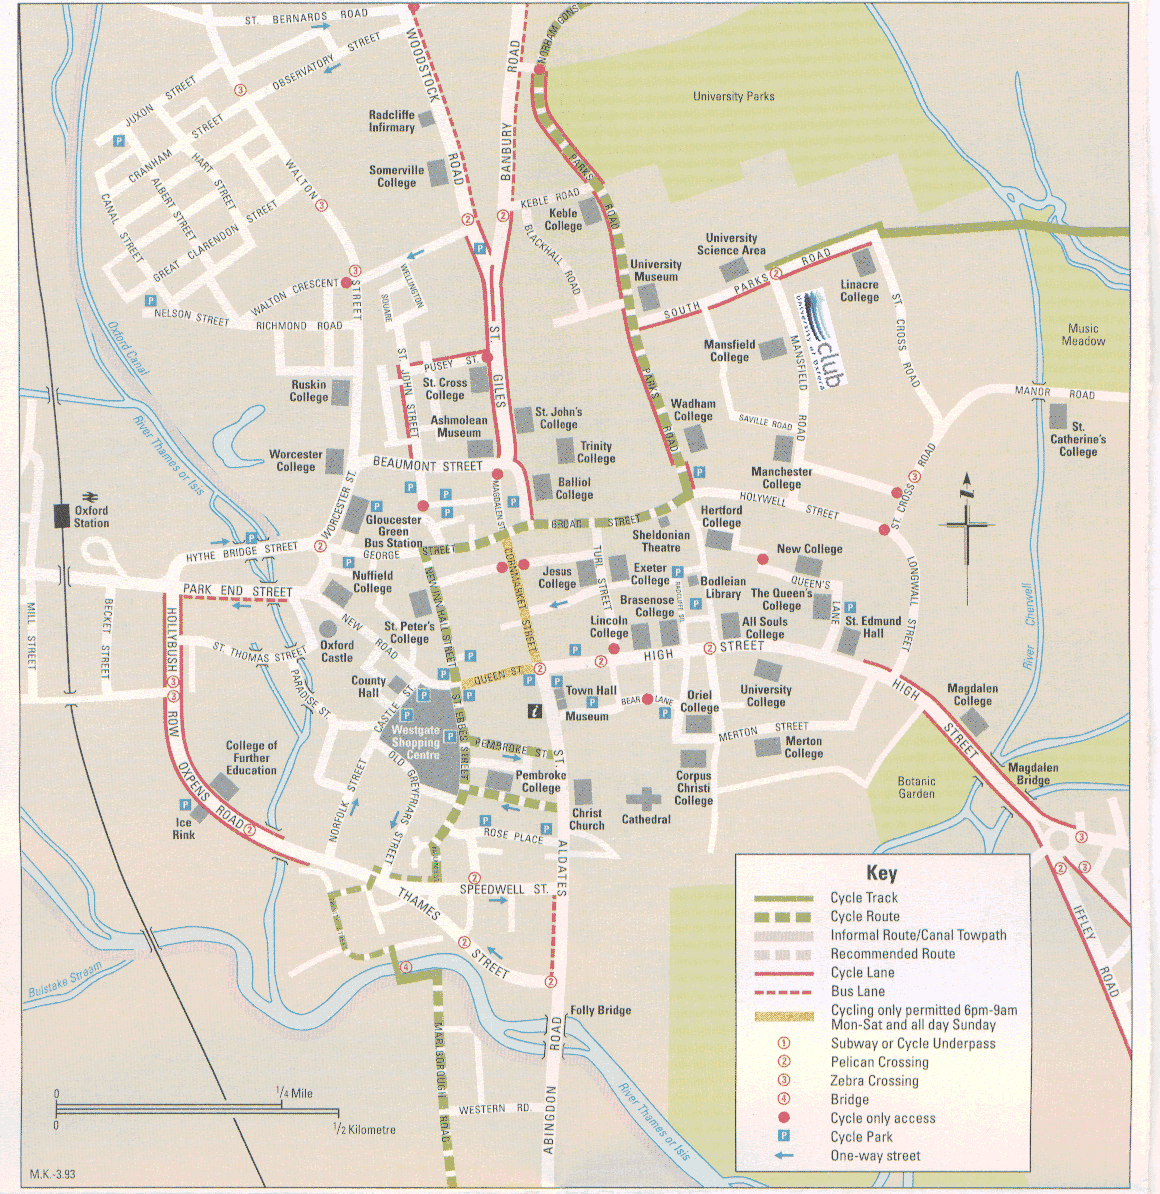 map-of-oxford-city-map-oxford